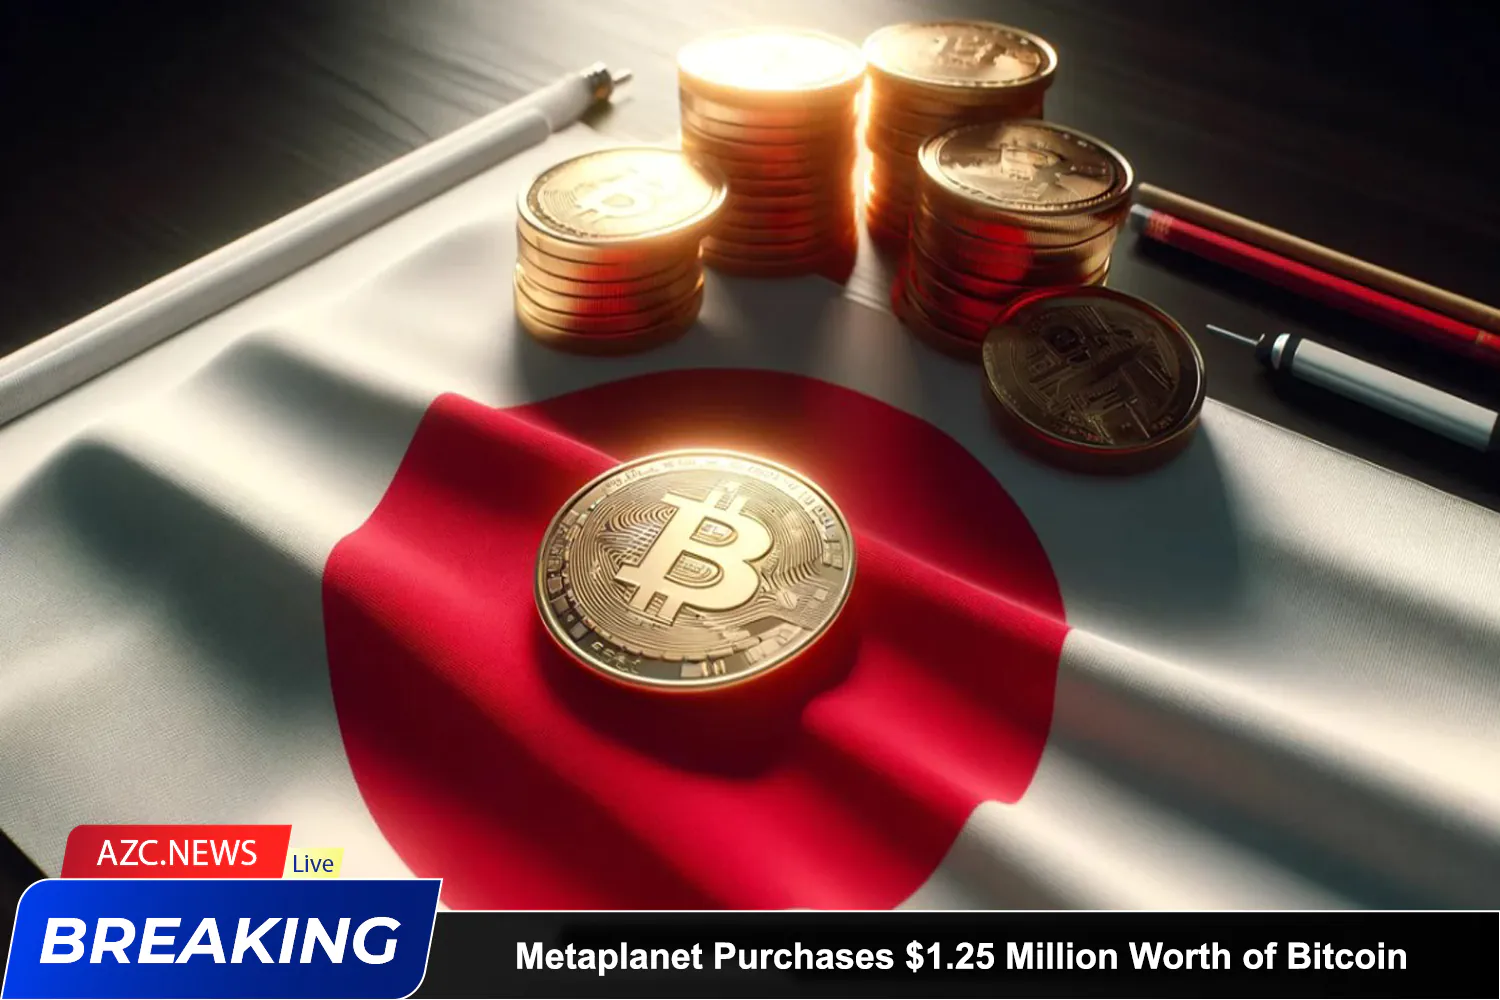 Azcnews Metaplanet Purchases $1.25 Million Worth Of Bitcoin